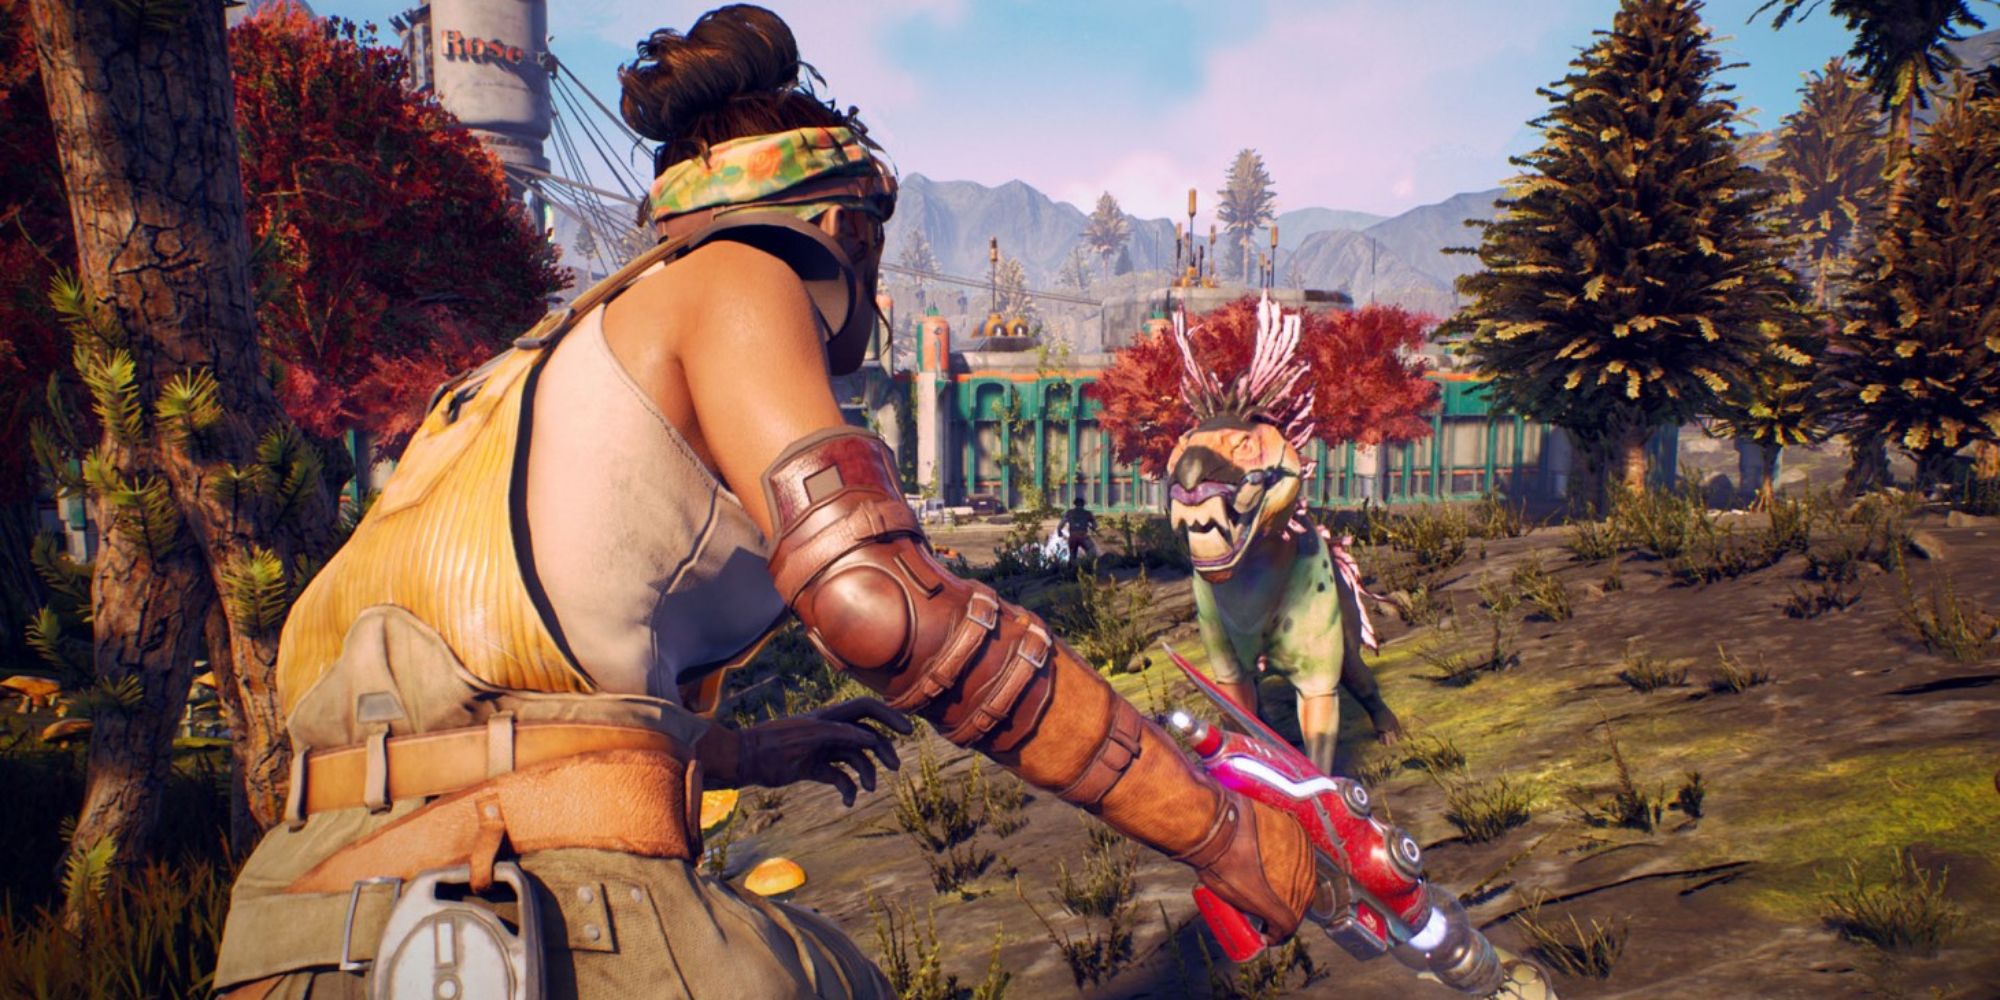 The Outer Worlds Screenshot Of Parvati fighting an alien creature